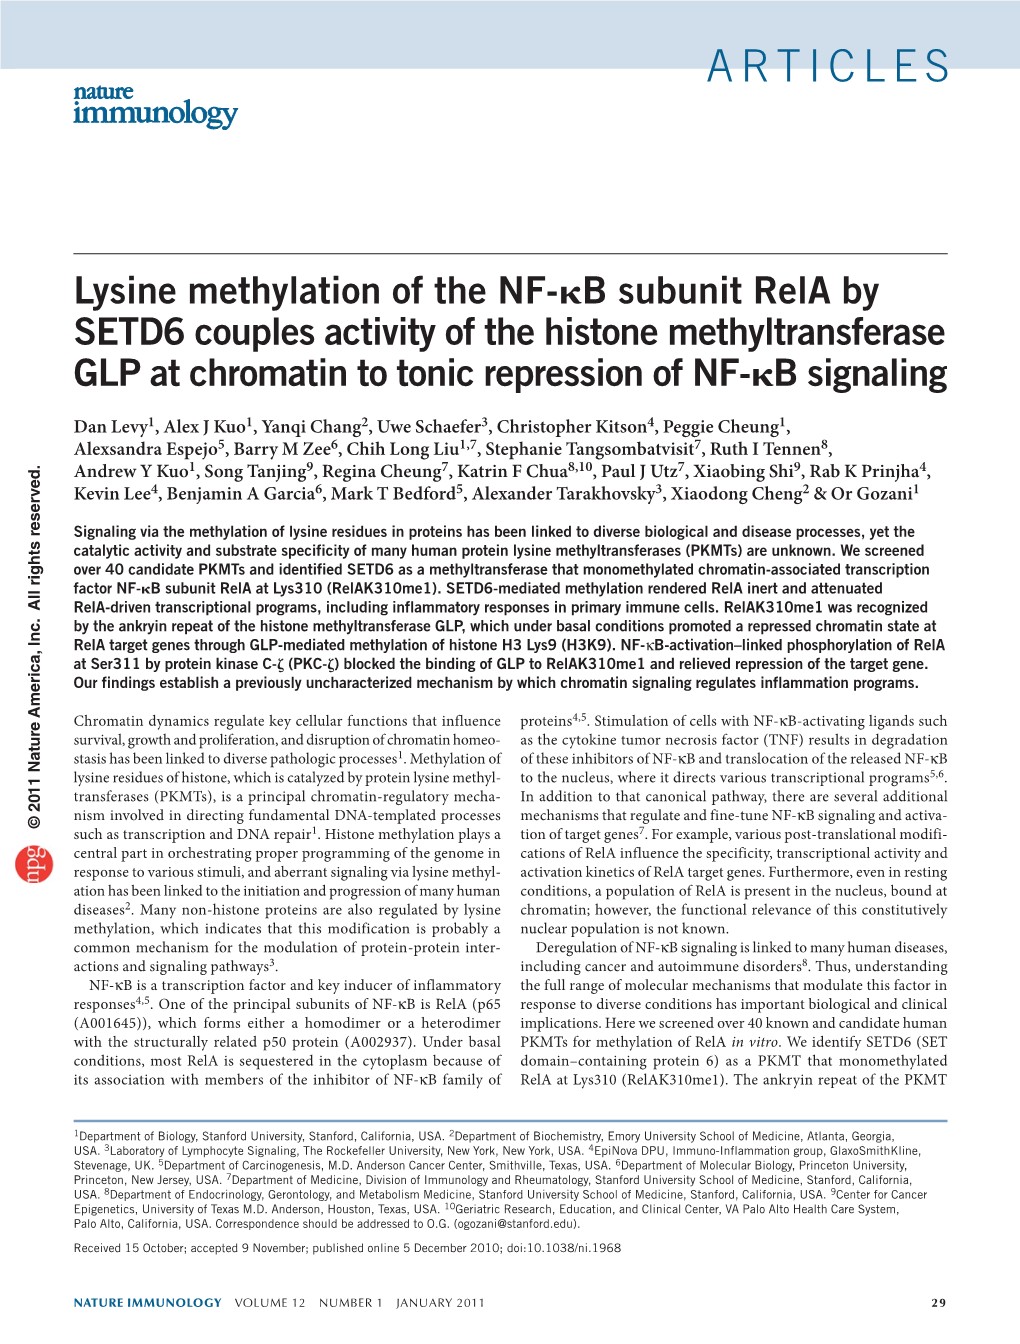 Lysine Methylation of the NF-Κb Subunit Rela by SETD6 Couples Activity of the Histone Methyltransferase GLP at Chromatin To